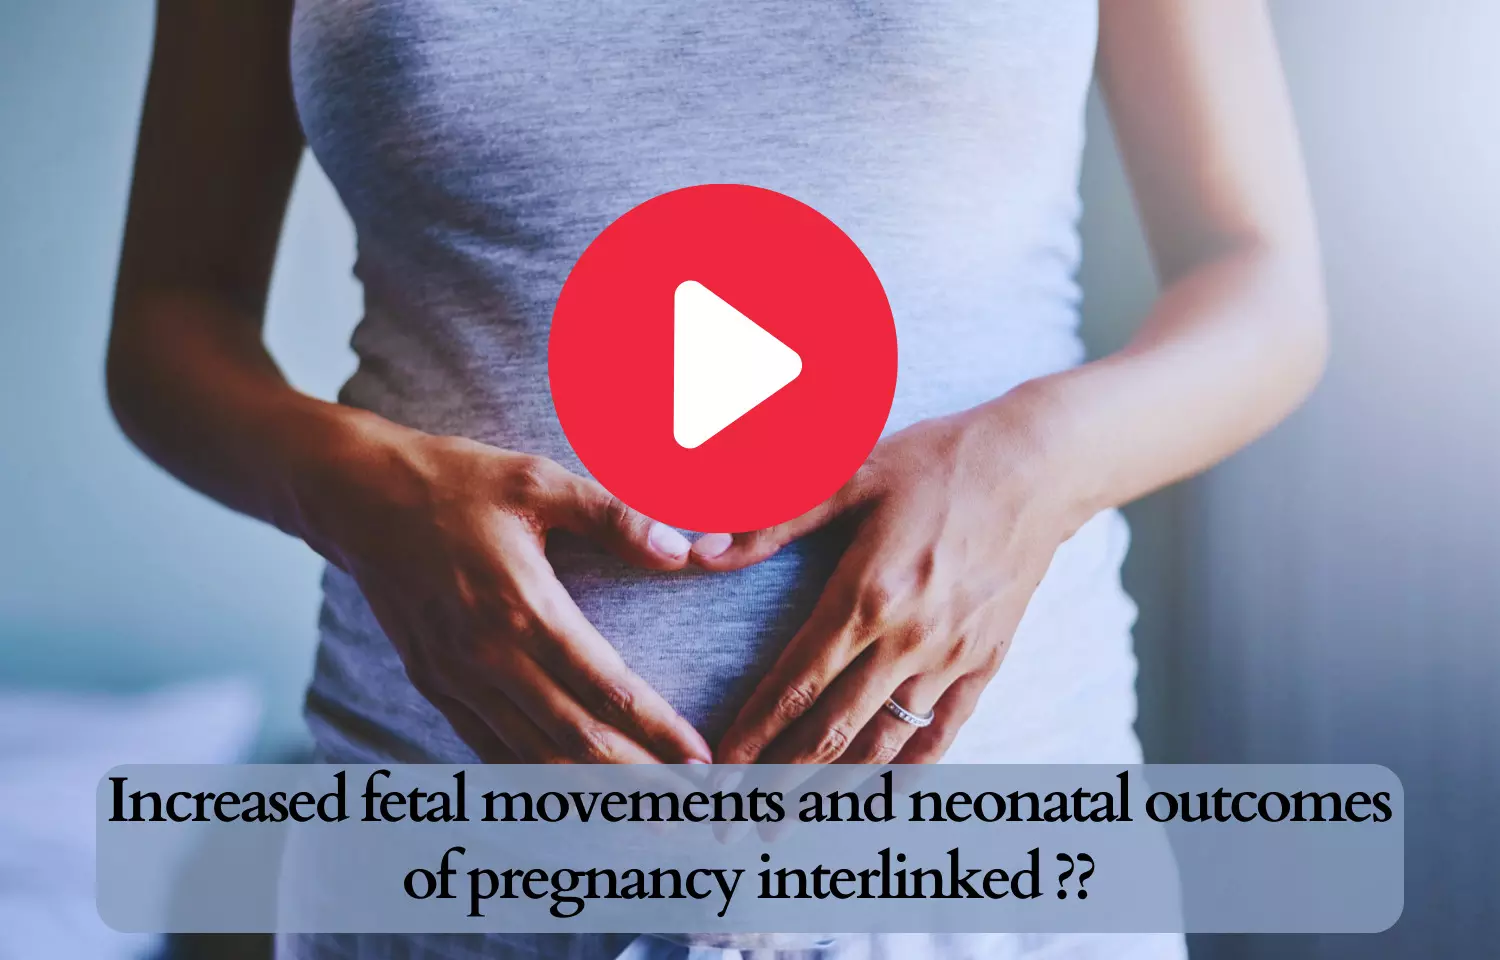 Increased fetal movements and neonatal outcomes of pregnancy interlinked ??